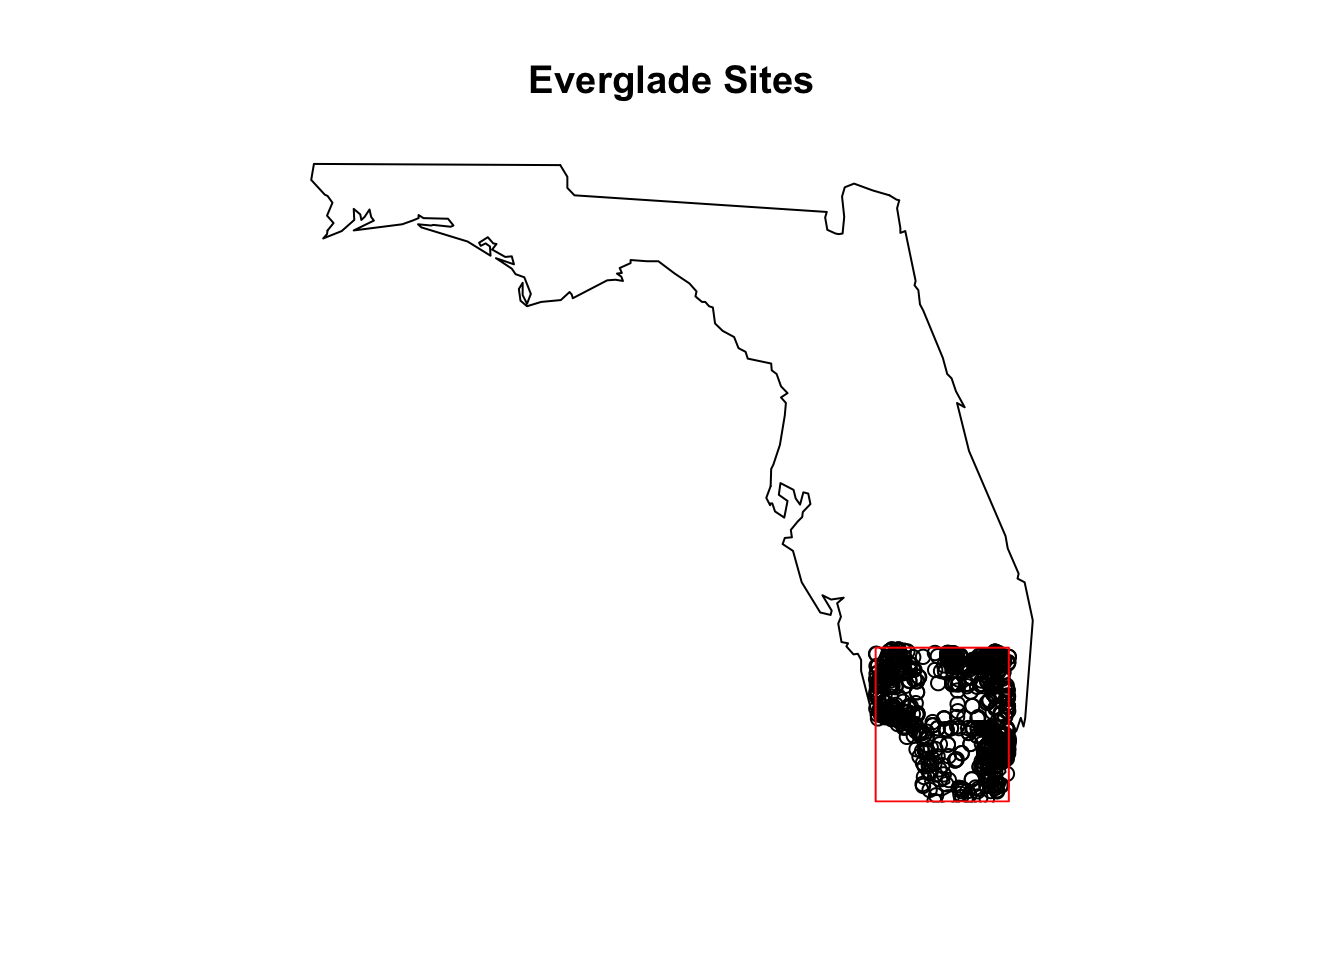 A map of NWIS site locations in the Everglades